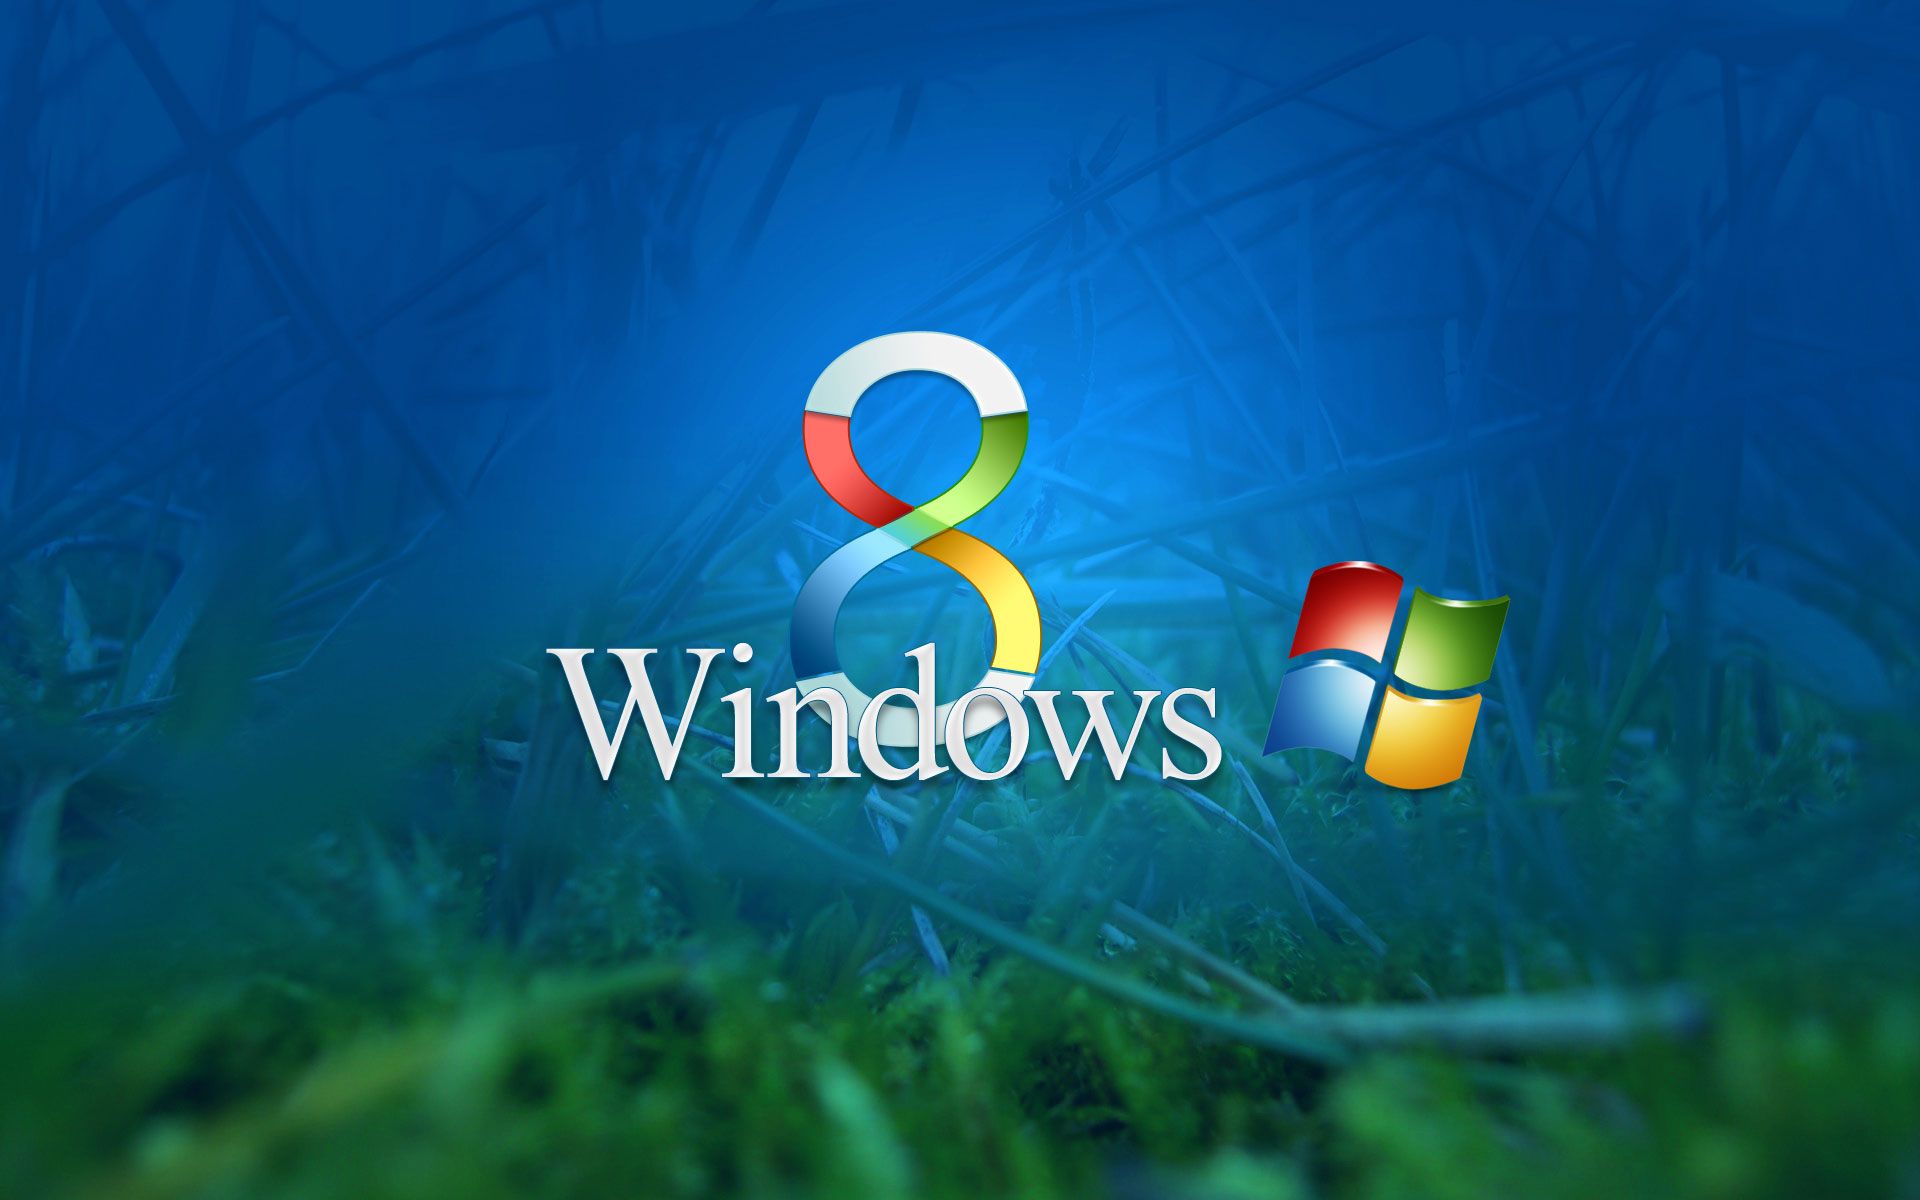 OS Windows 8 wallpapers and images - wallpapers, pictures, photos